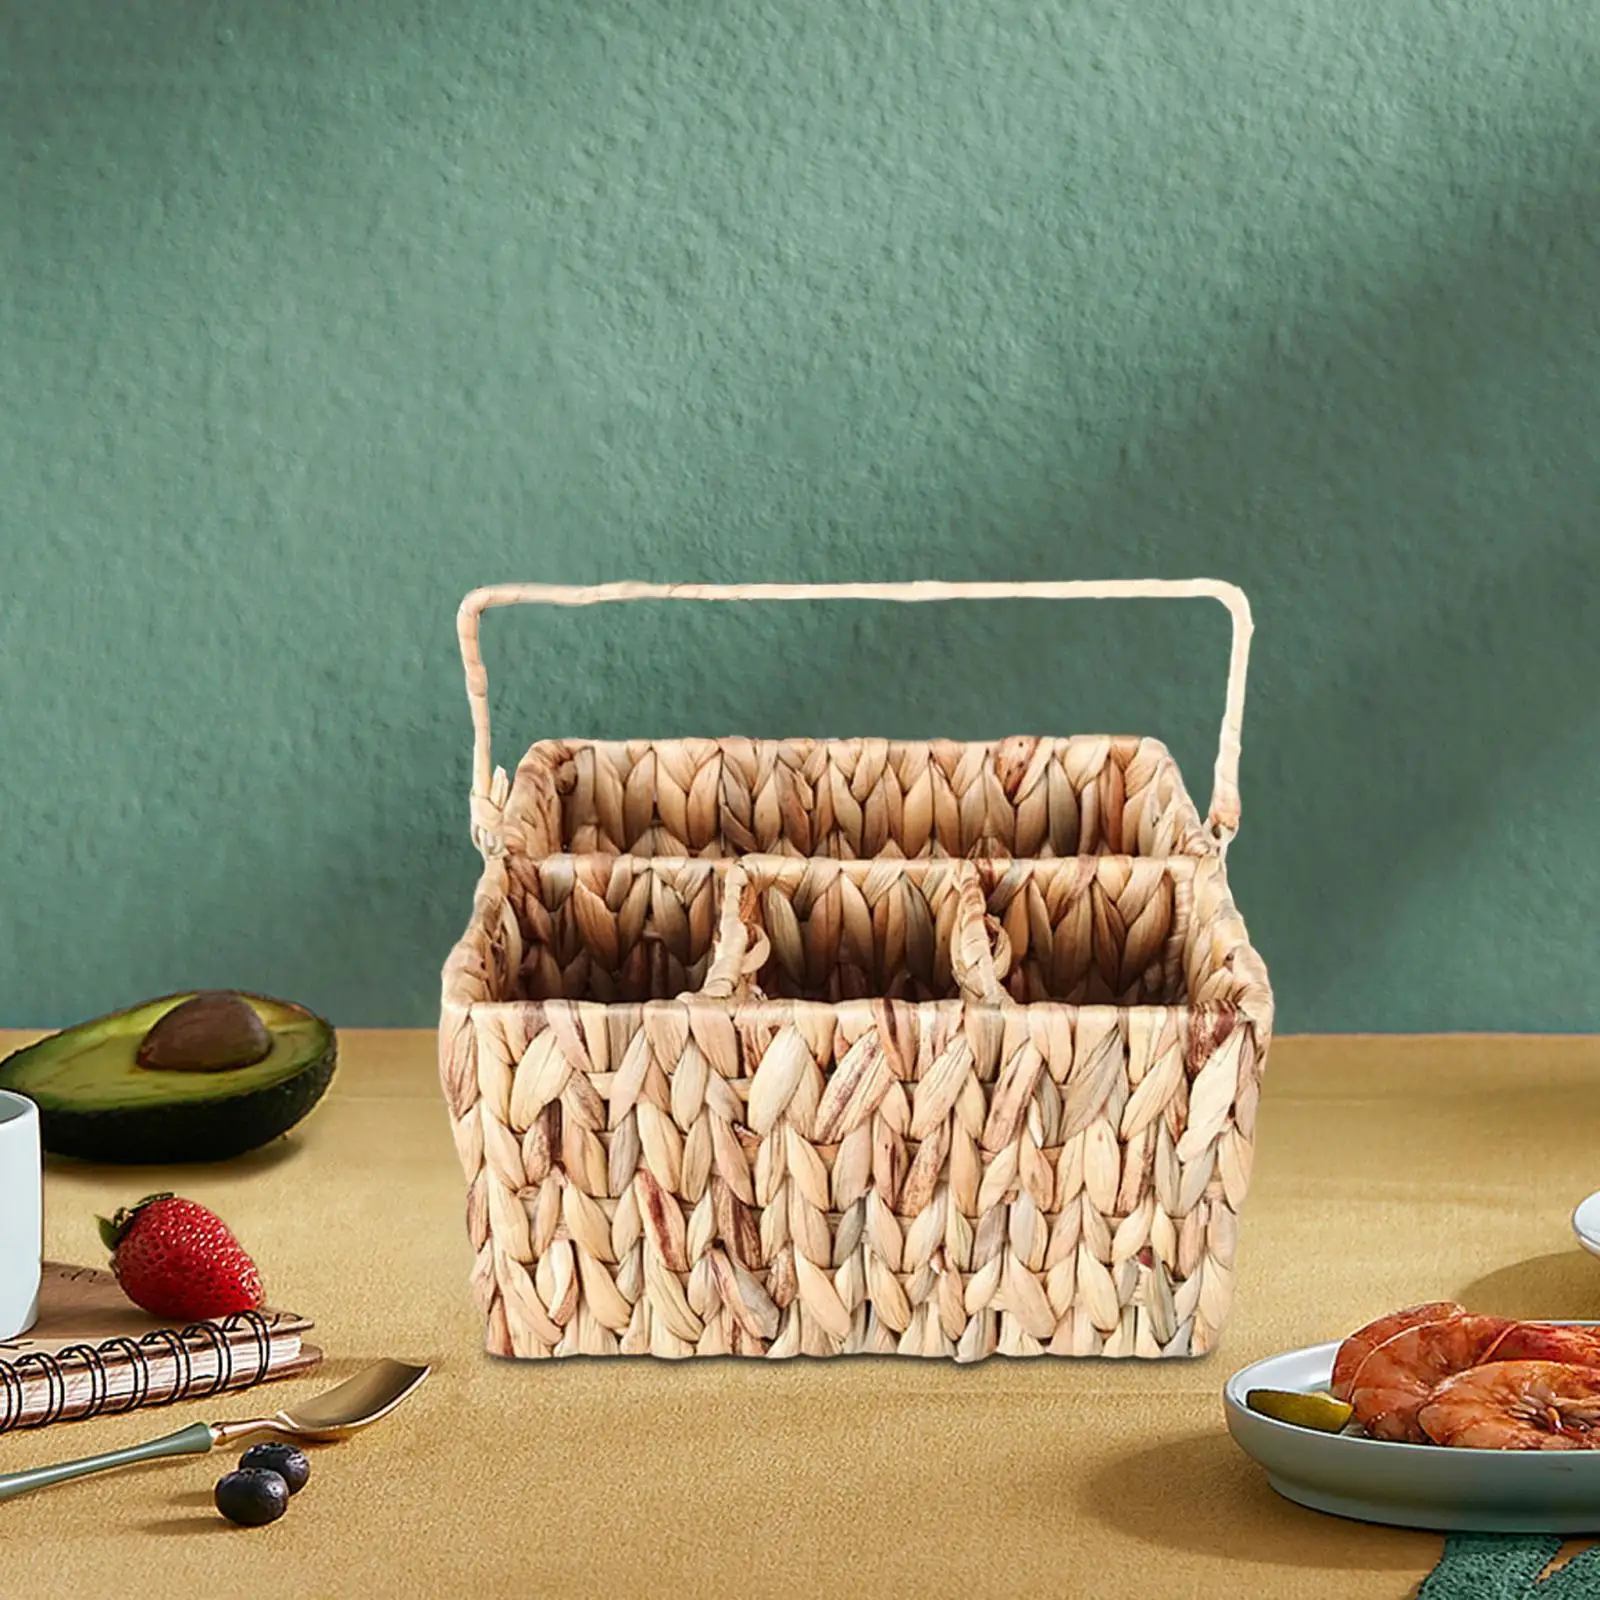 Rattan Woven Divided Storage Basket with Handle Cosmetics Holder 10x7.9x5.9inch for Organizing Tabletop Durable Lightweight